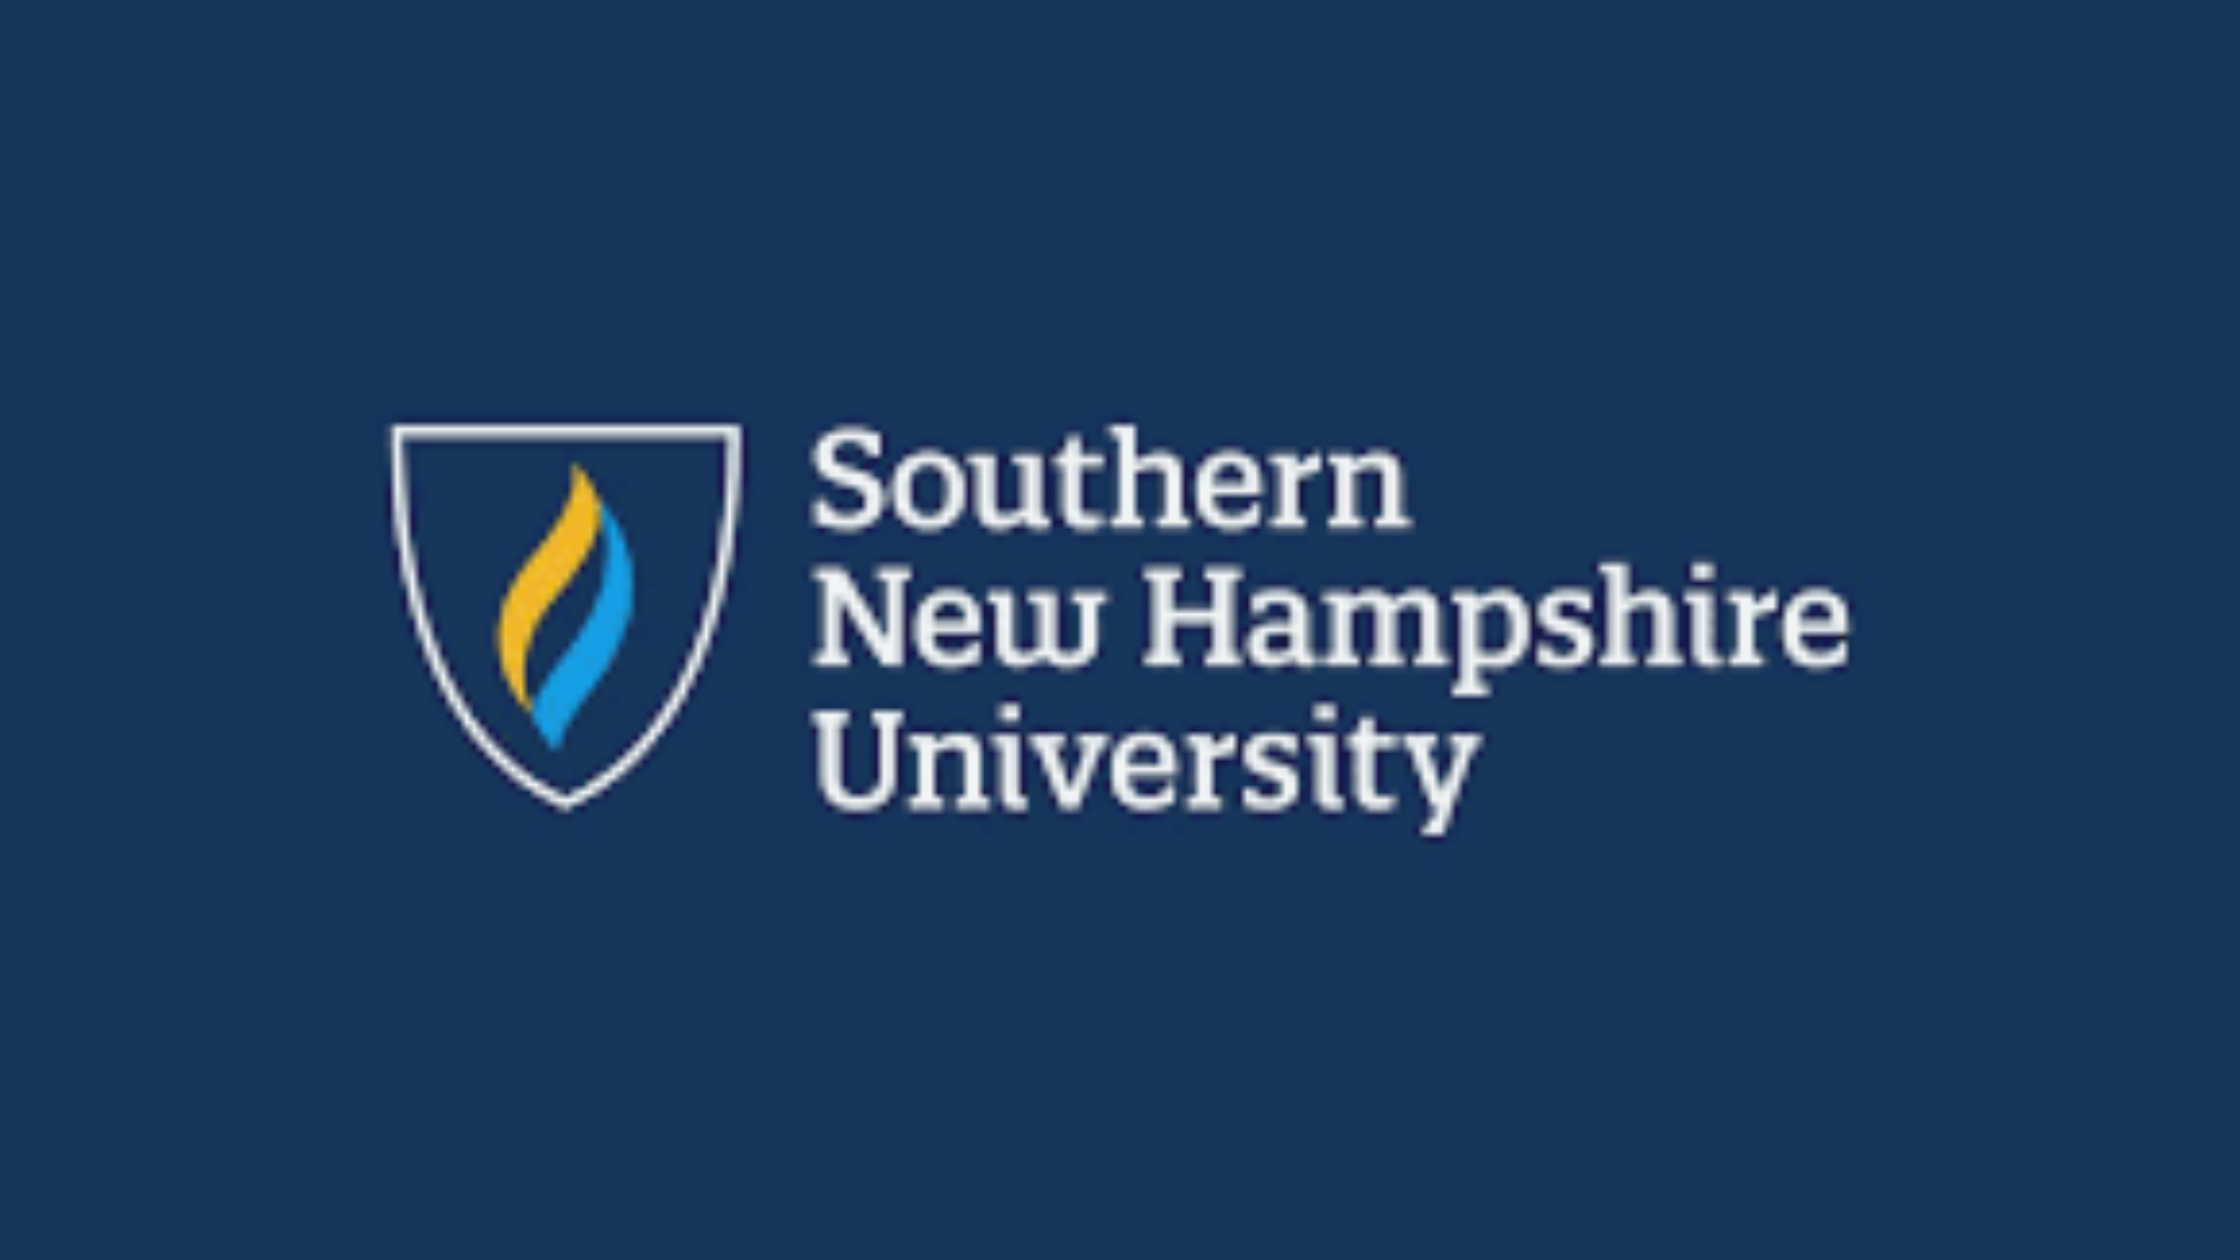 Masters Degree Programs in Southern New Hampshire University